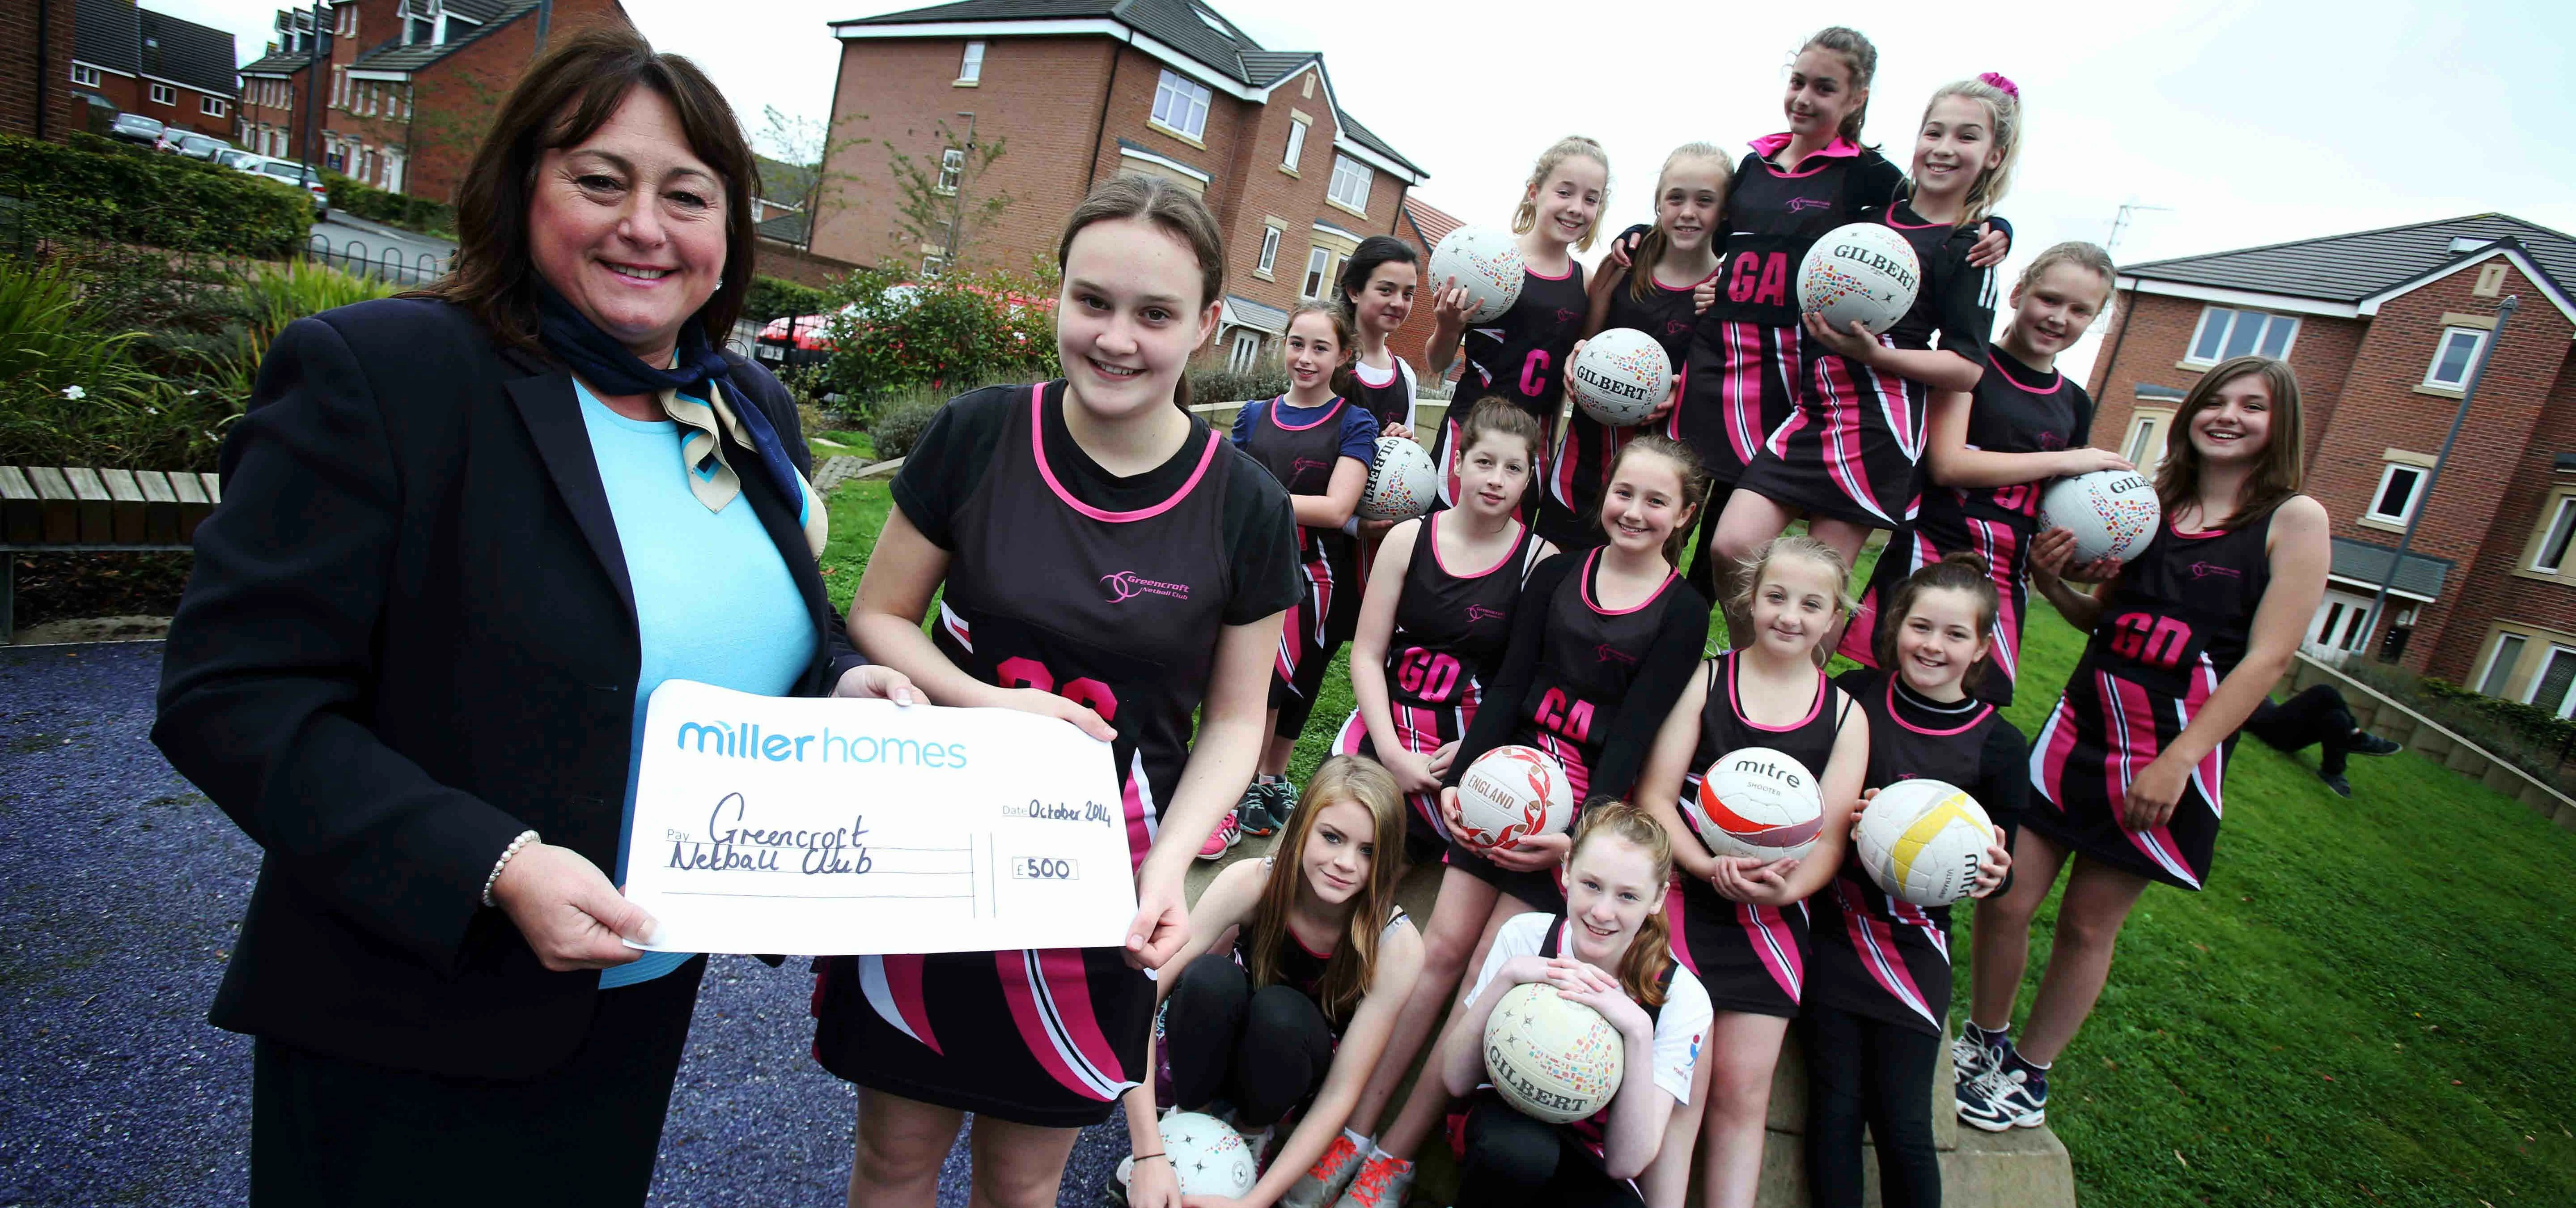 Greencroft Netball Club netted £500 worth of funding in 2014 after being crowned the North East winn